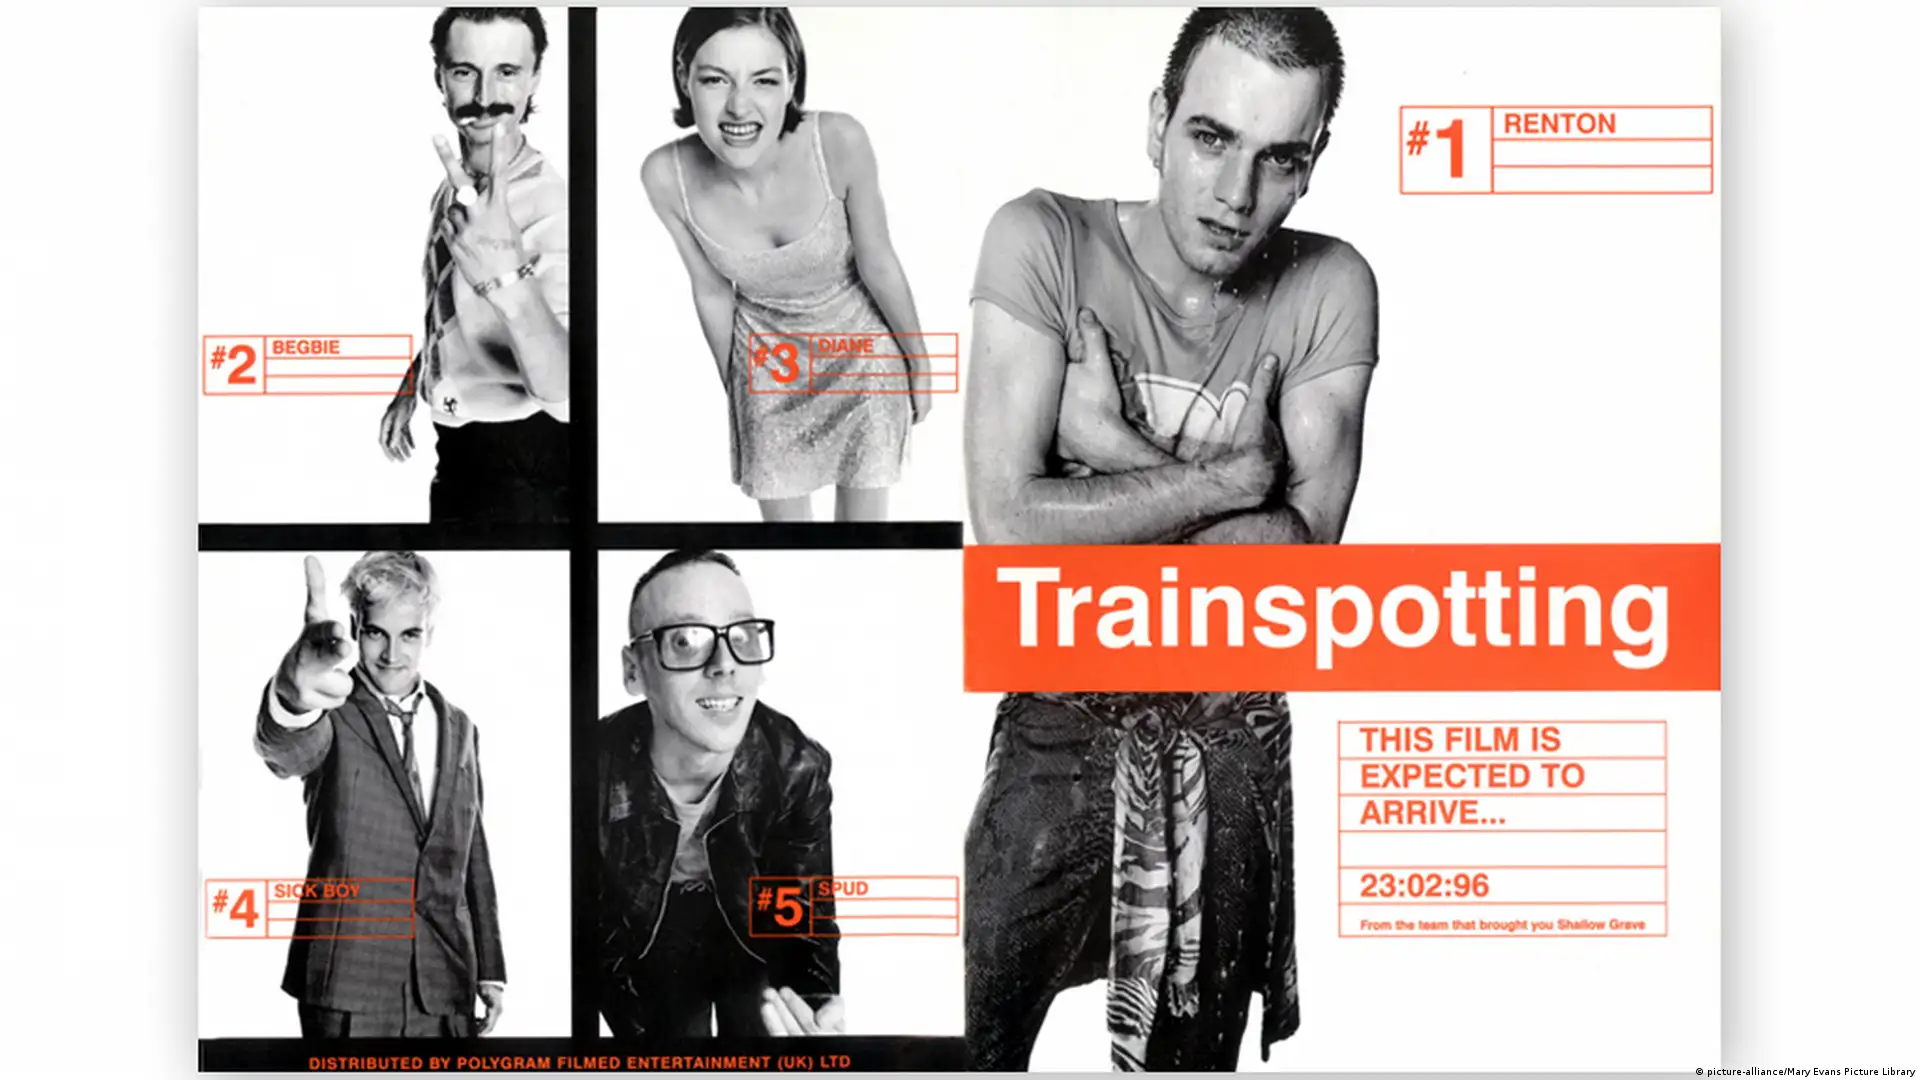 The Original 'Trainspotting' Soundtrack Holds Up Even Better Than